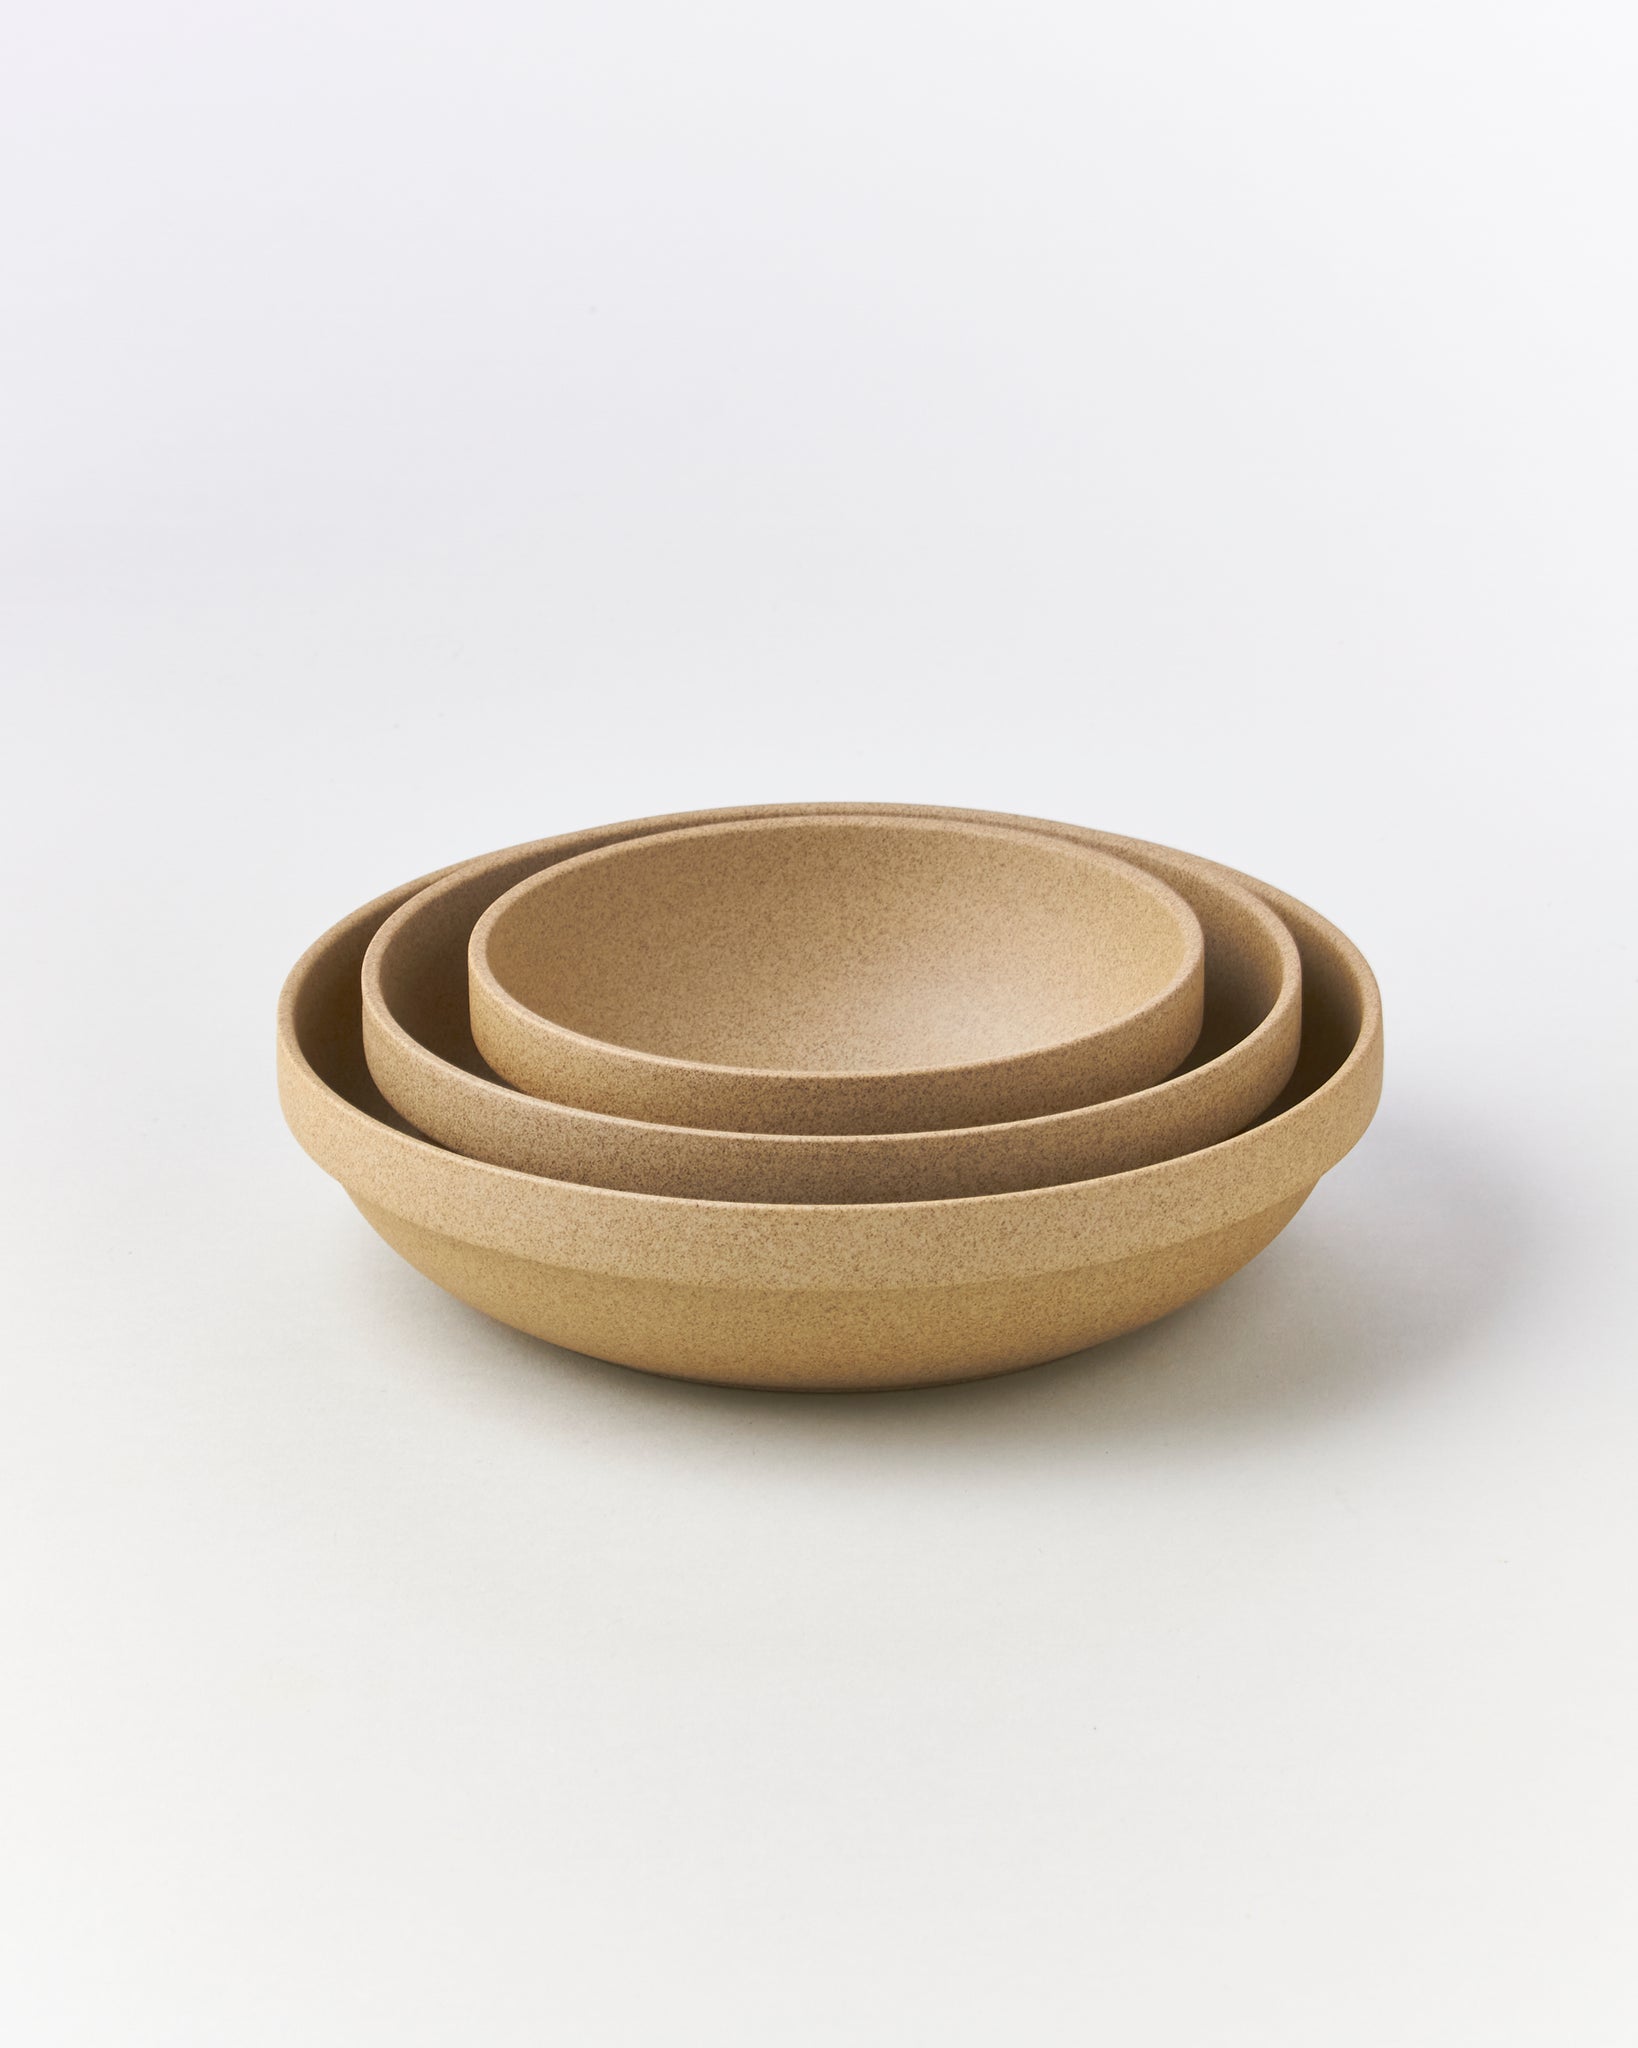 Hasami 7 3/8-inch Round Bowl in Natural